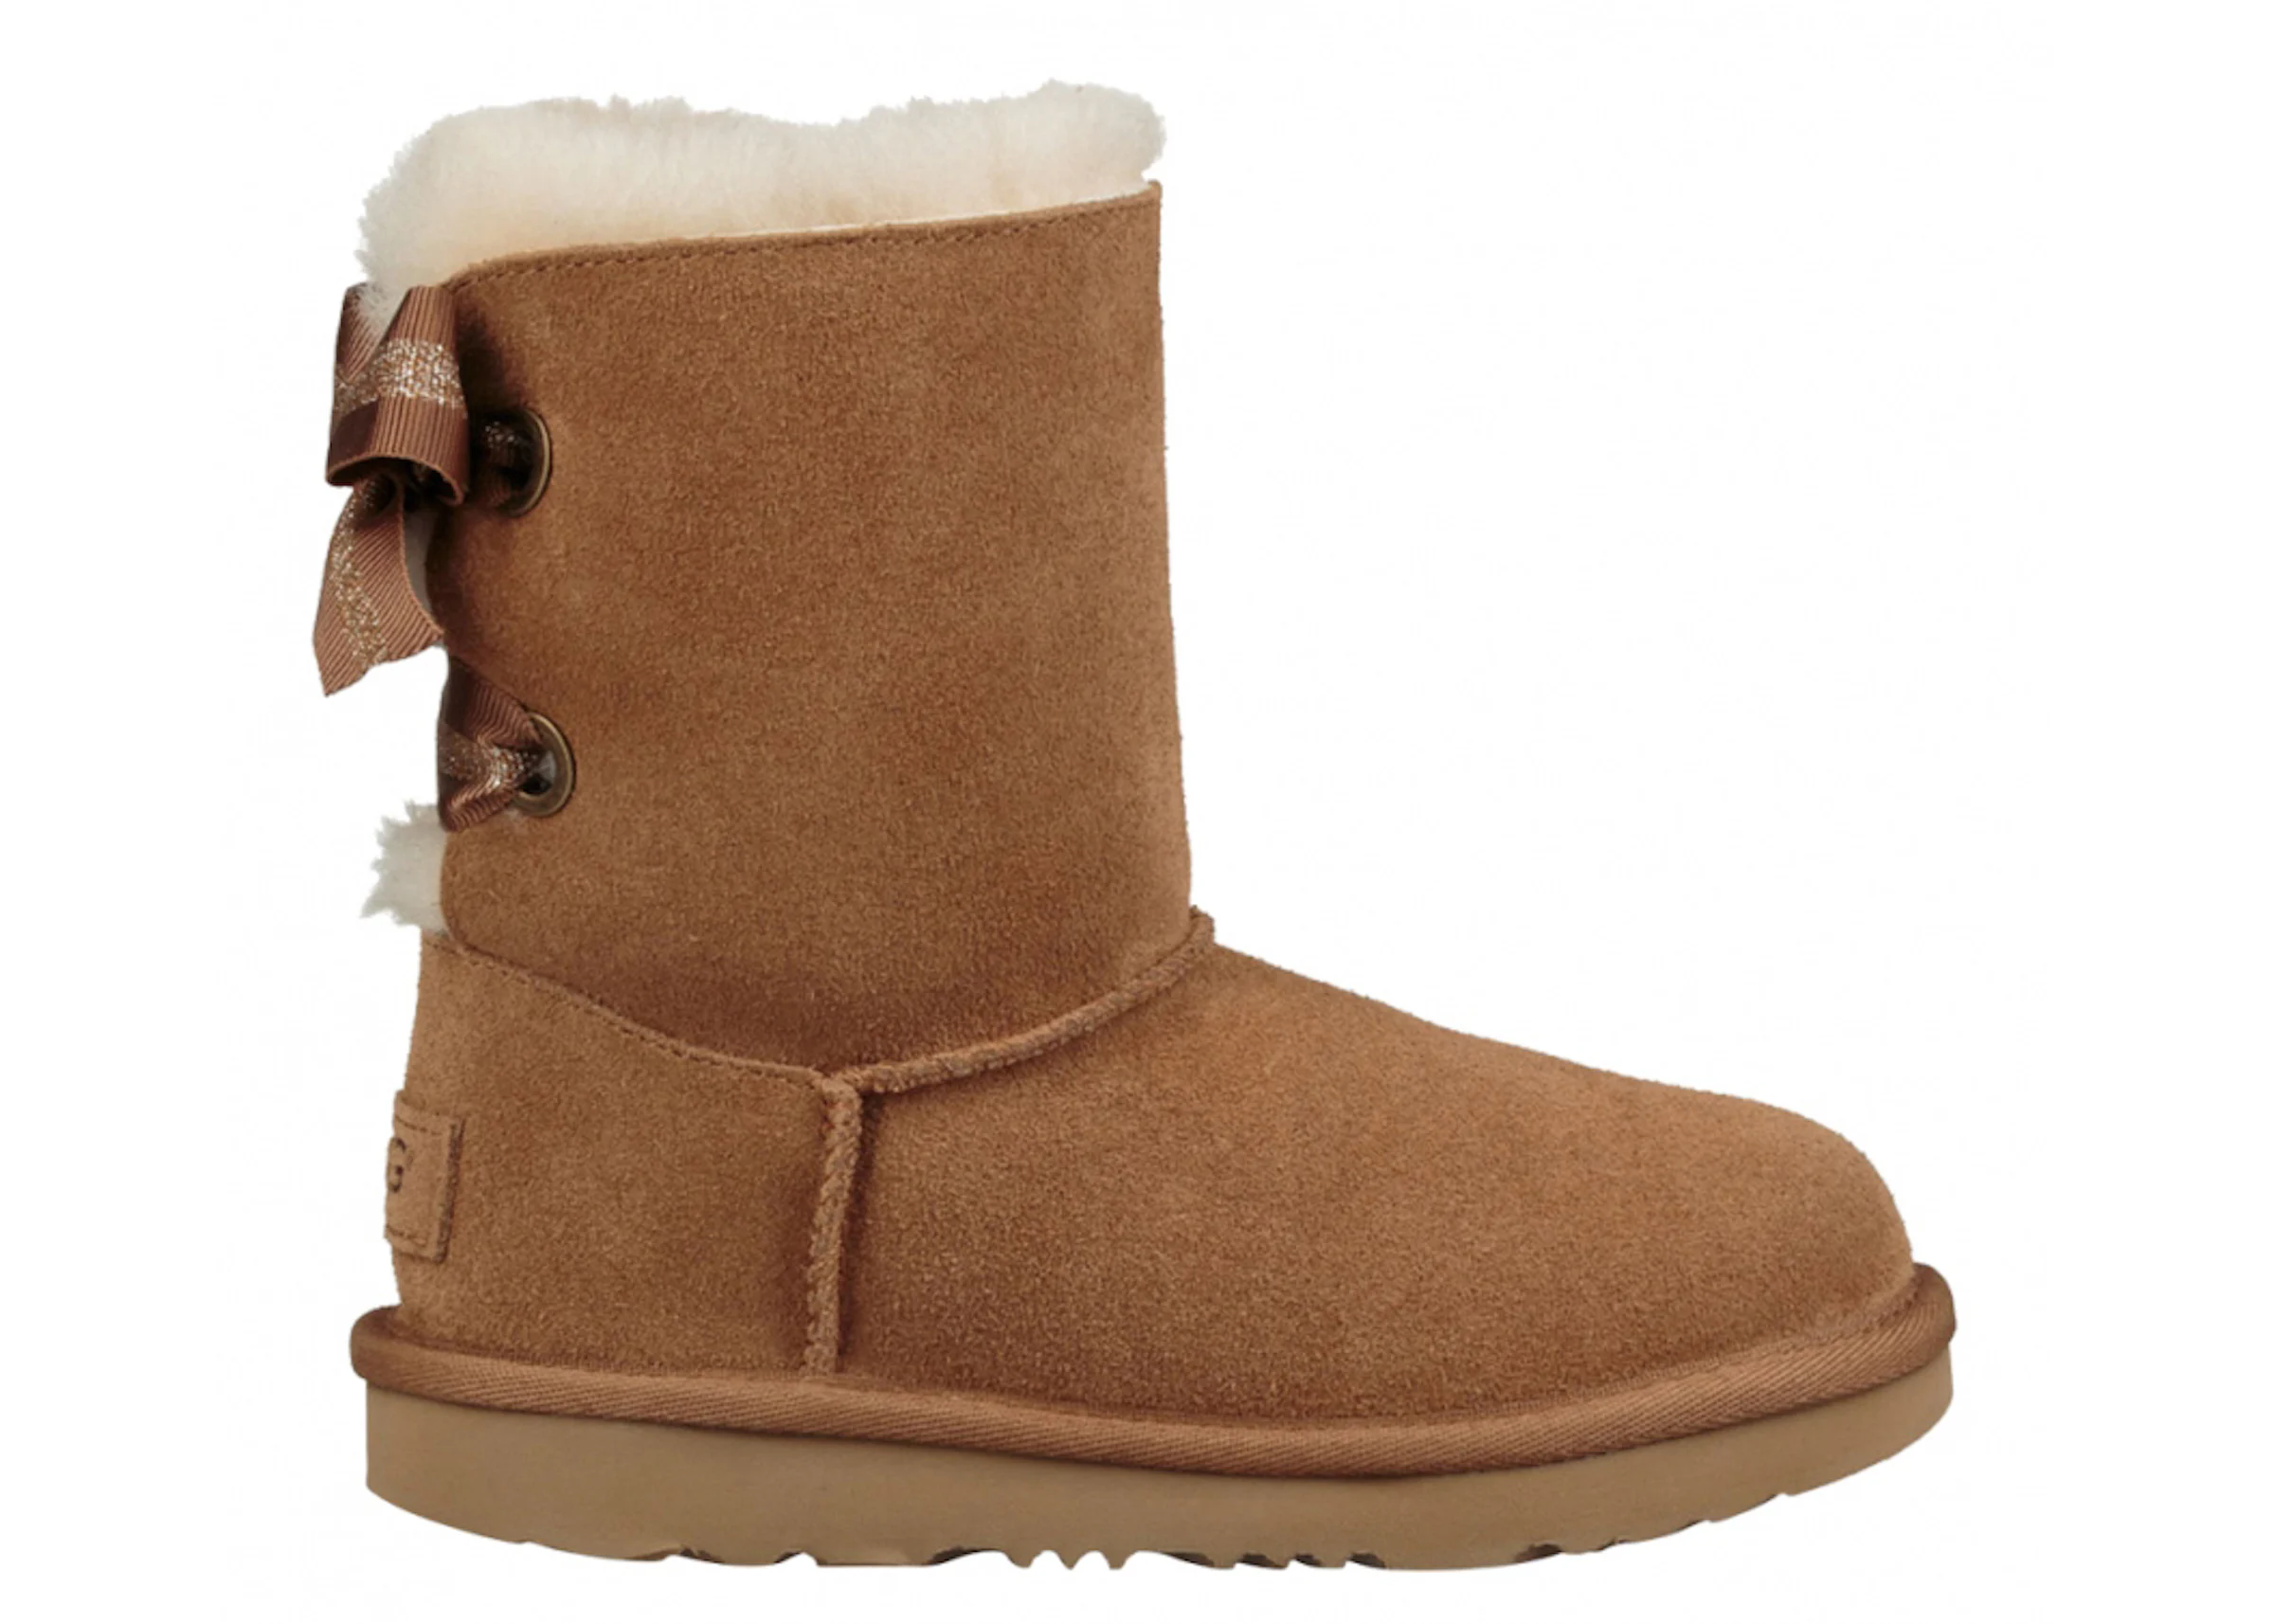 https://images.stockx.com/images/UGG-Bailey-Bow-II-Boot-Customizable-Ribbon-Chestnut-GS.jpg?fit=fill&bg=FFFFFF&w=1200&h=857&fm=webp&auto=compress&dpr=2&trim=color&updated_at=1631581260&q=60